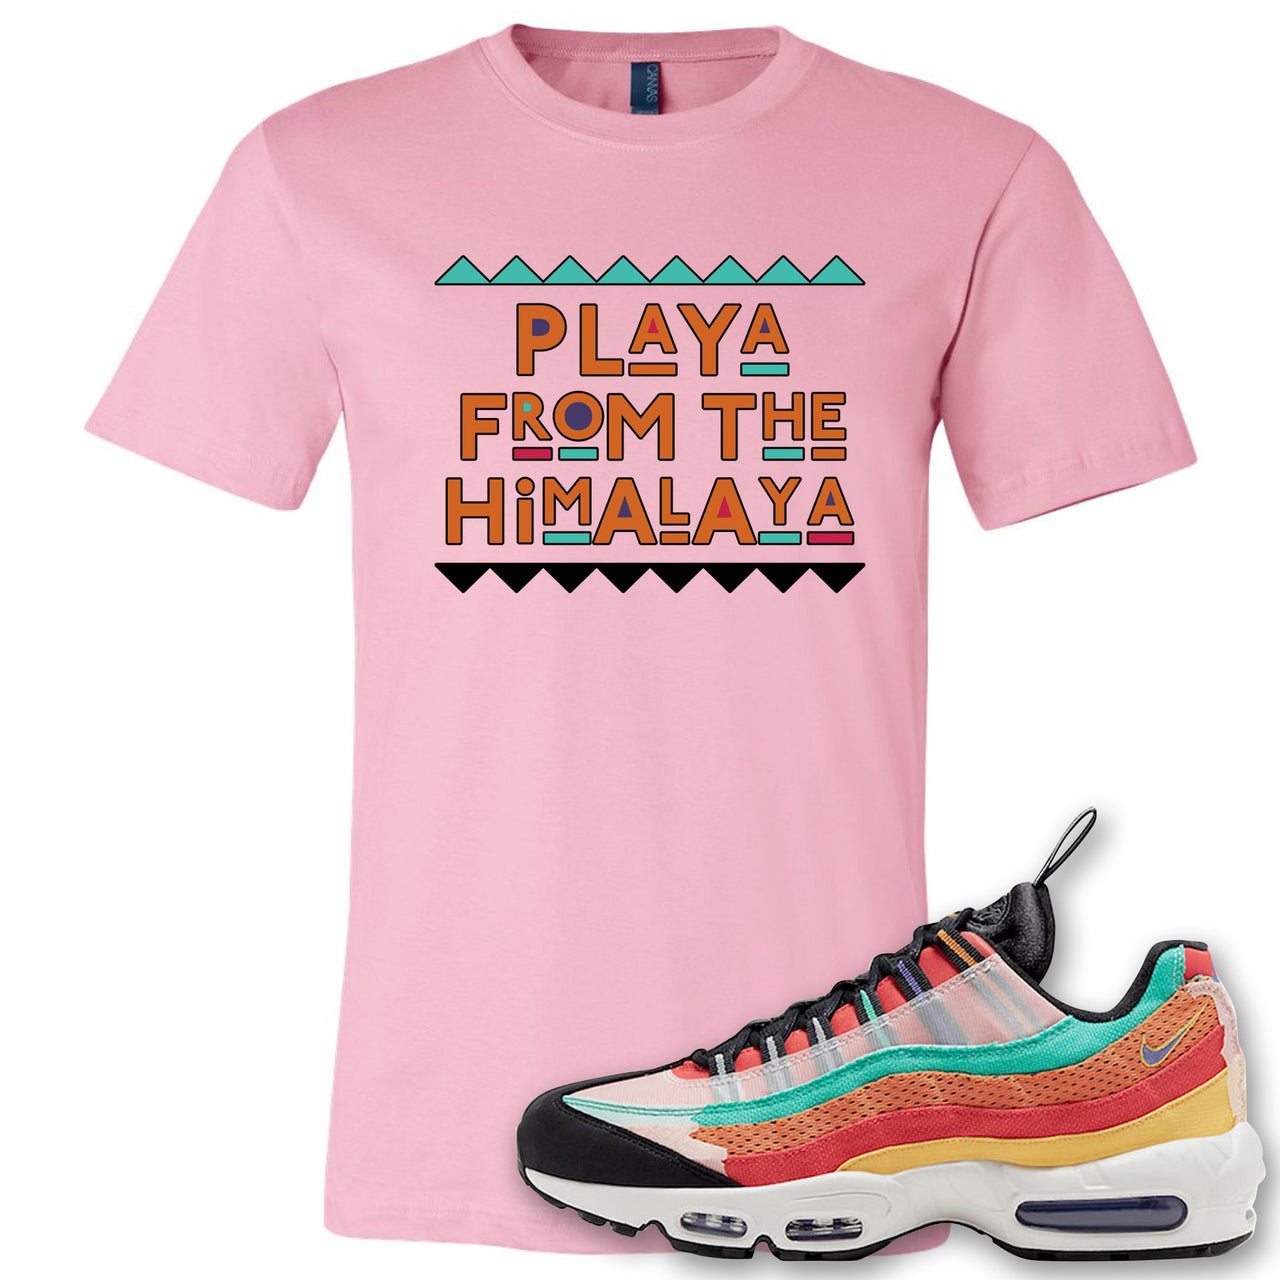 Air Max 95 Black History Month Sneaker Soft Pink T Shirt | Tees to match Nike Air Max 95 Black History Month Shoes | Playa From The Himalaya